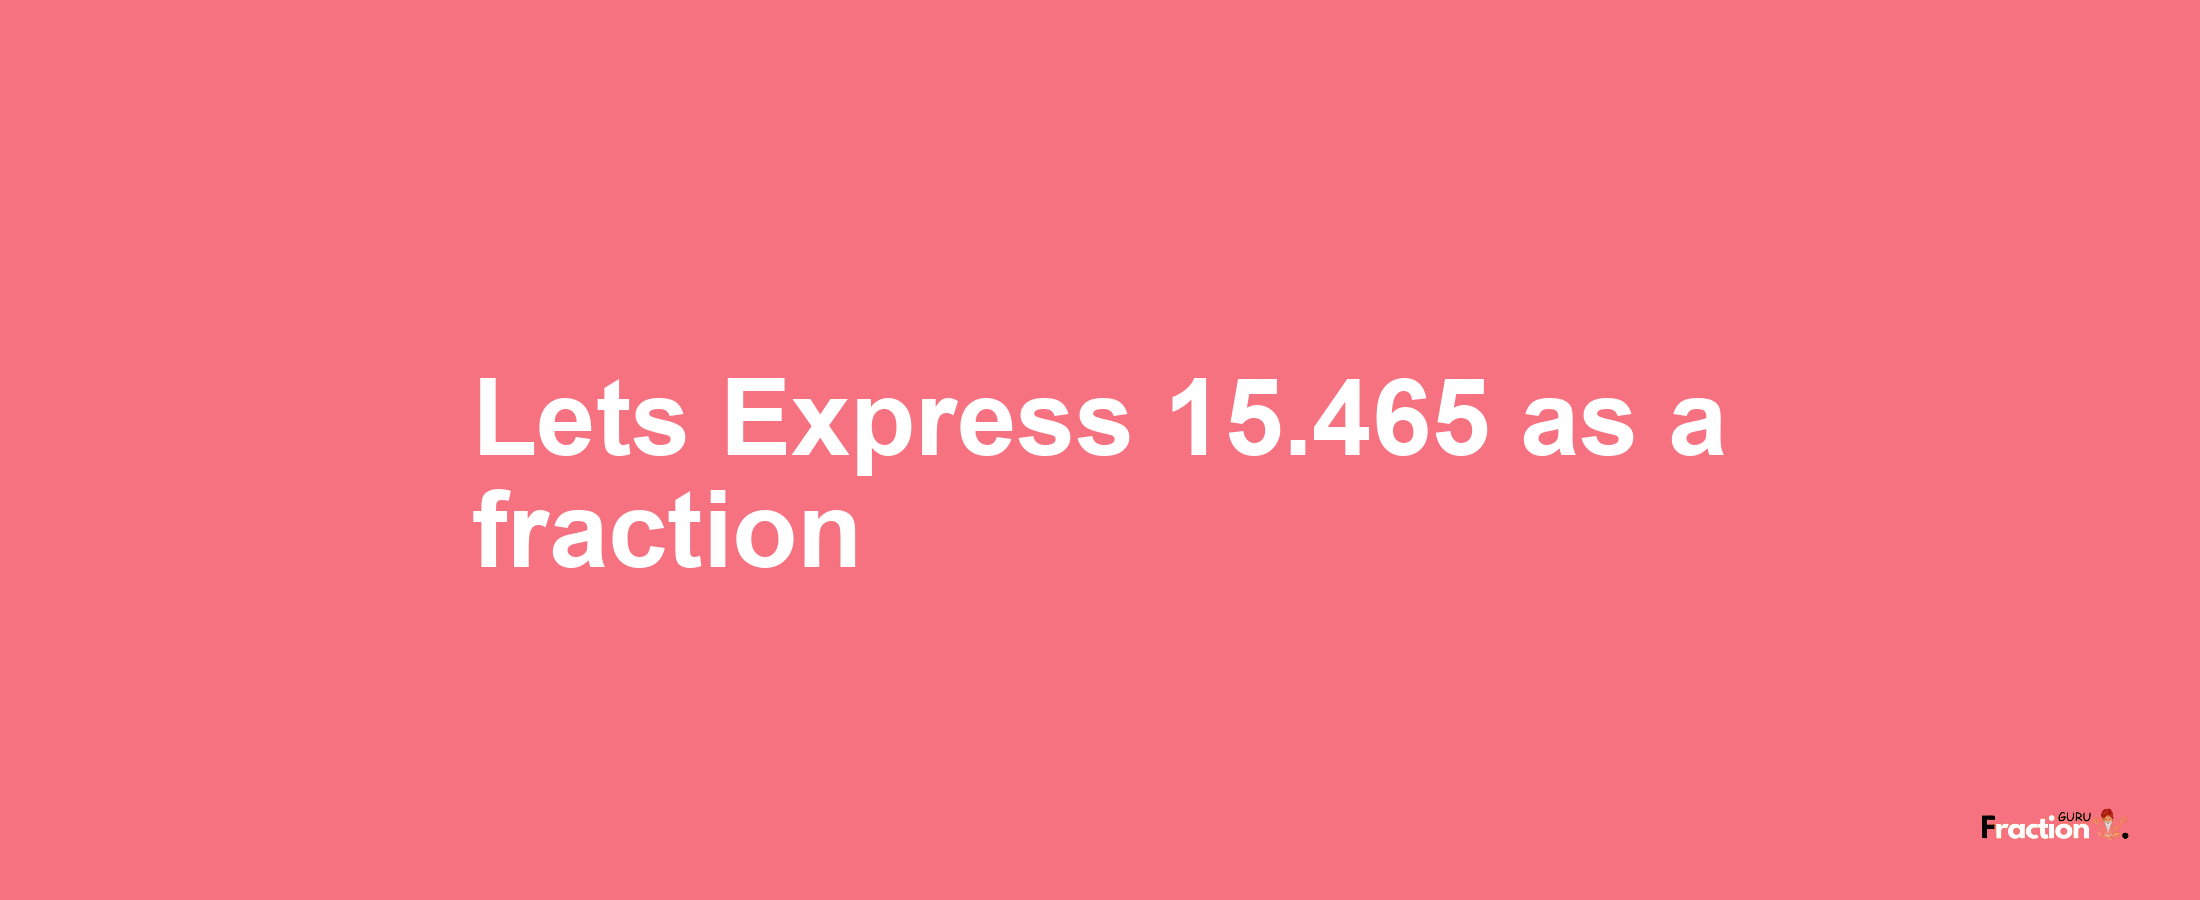 Lets Express 15.465 as afraction